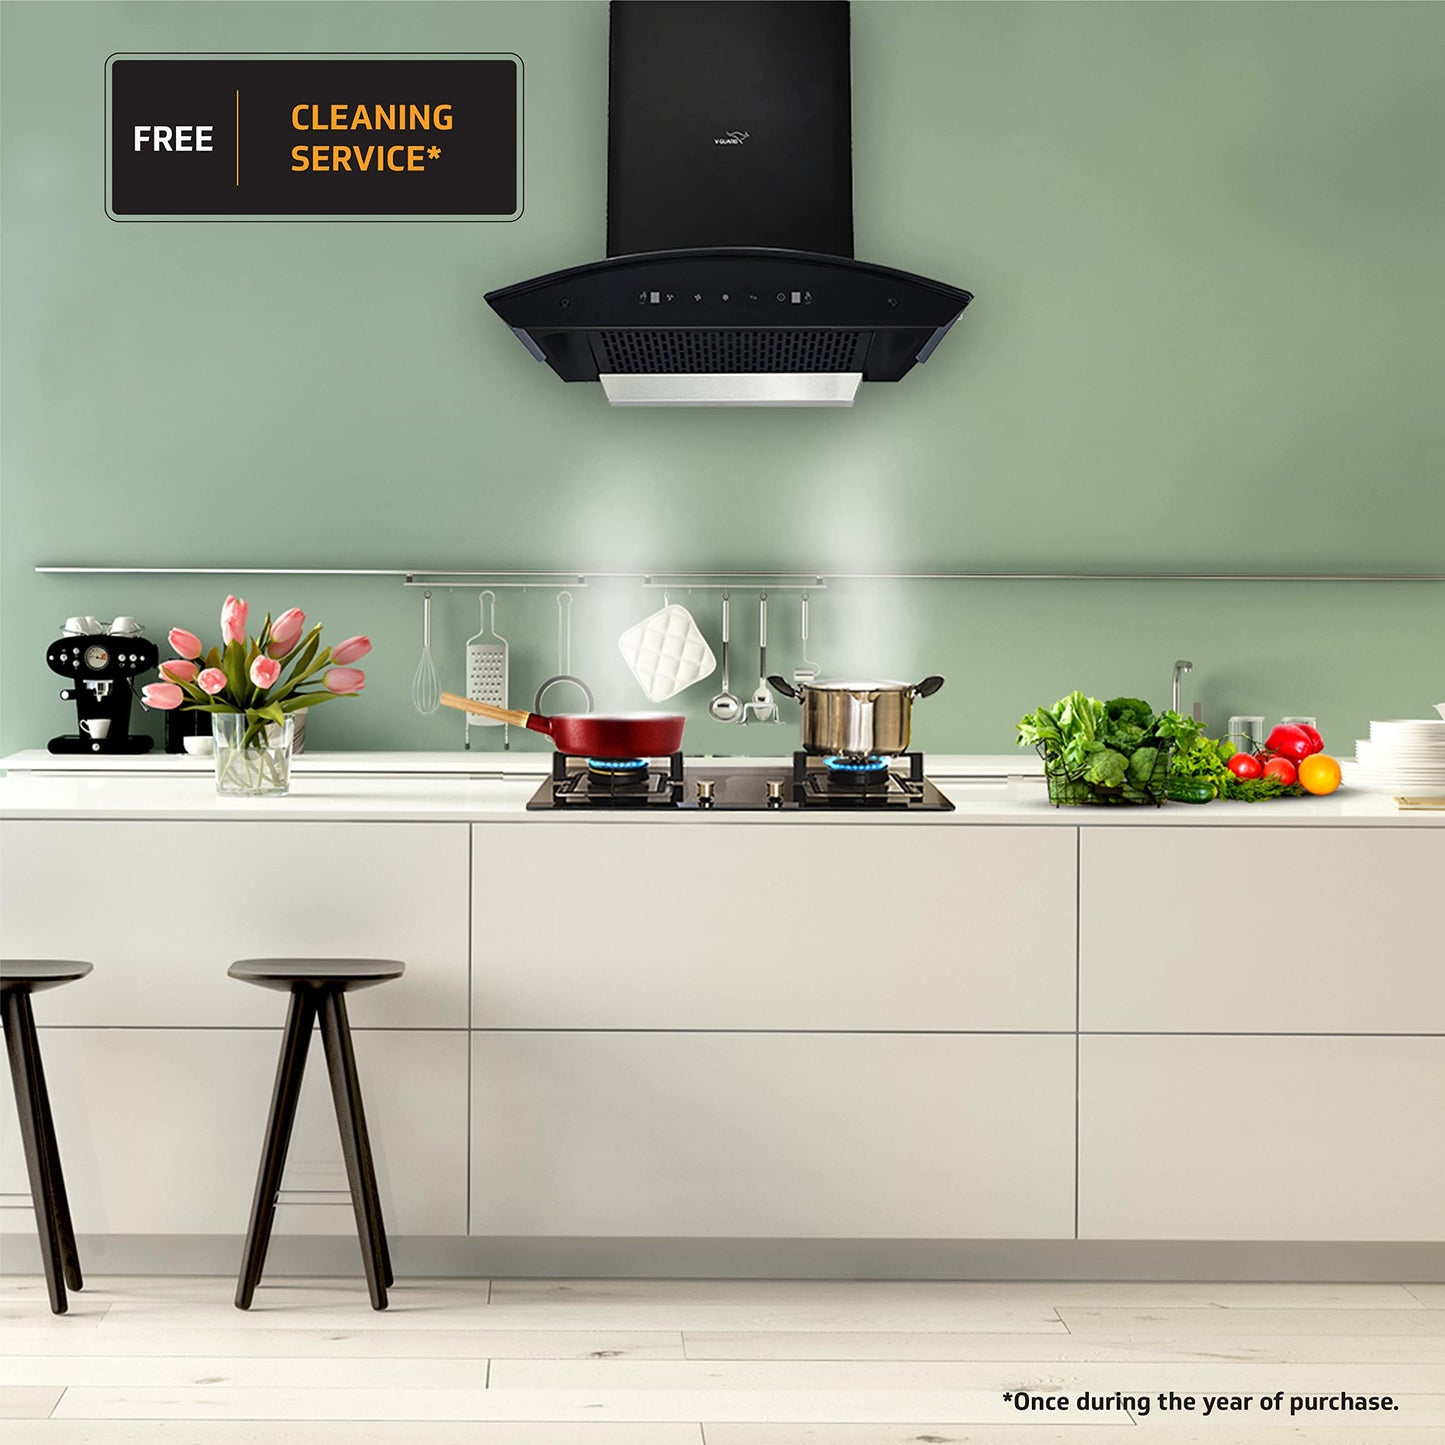 X10 BL180 Kitchen Chimney with 1350m³/hr Suction, Intelligent Auto Clean, Curved Glass, Baffle Filter, Motion Sensor Controls, Oil Collector Tray, LED Light (Black)